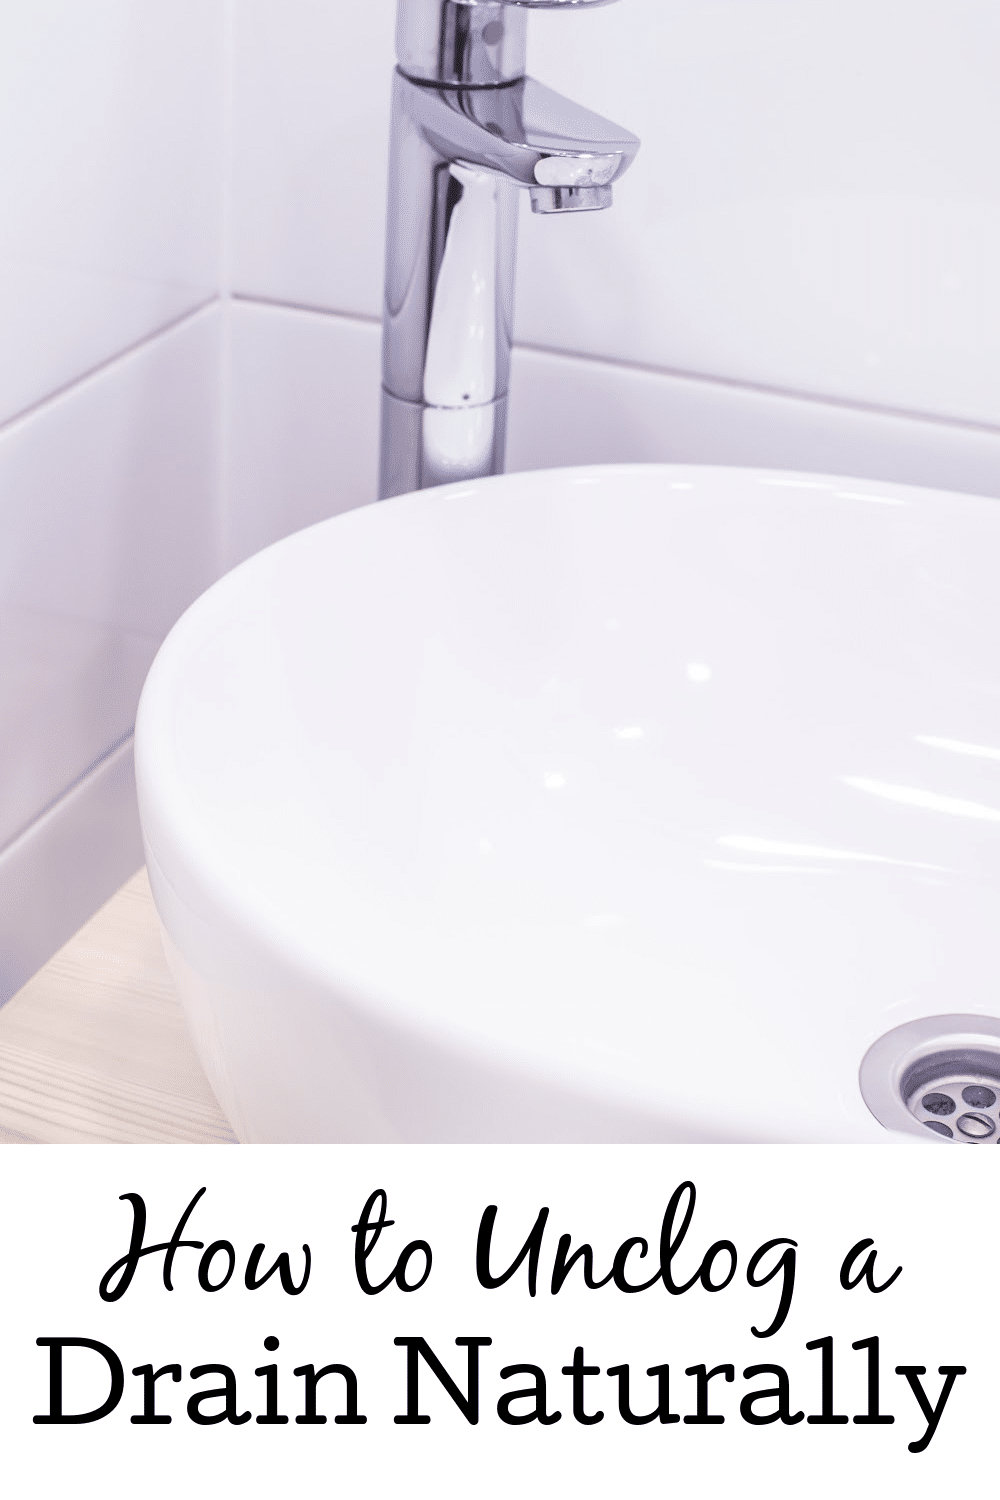 How to Unclog a Sink Drain - NATURALLY! - 365 Days of Baking